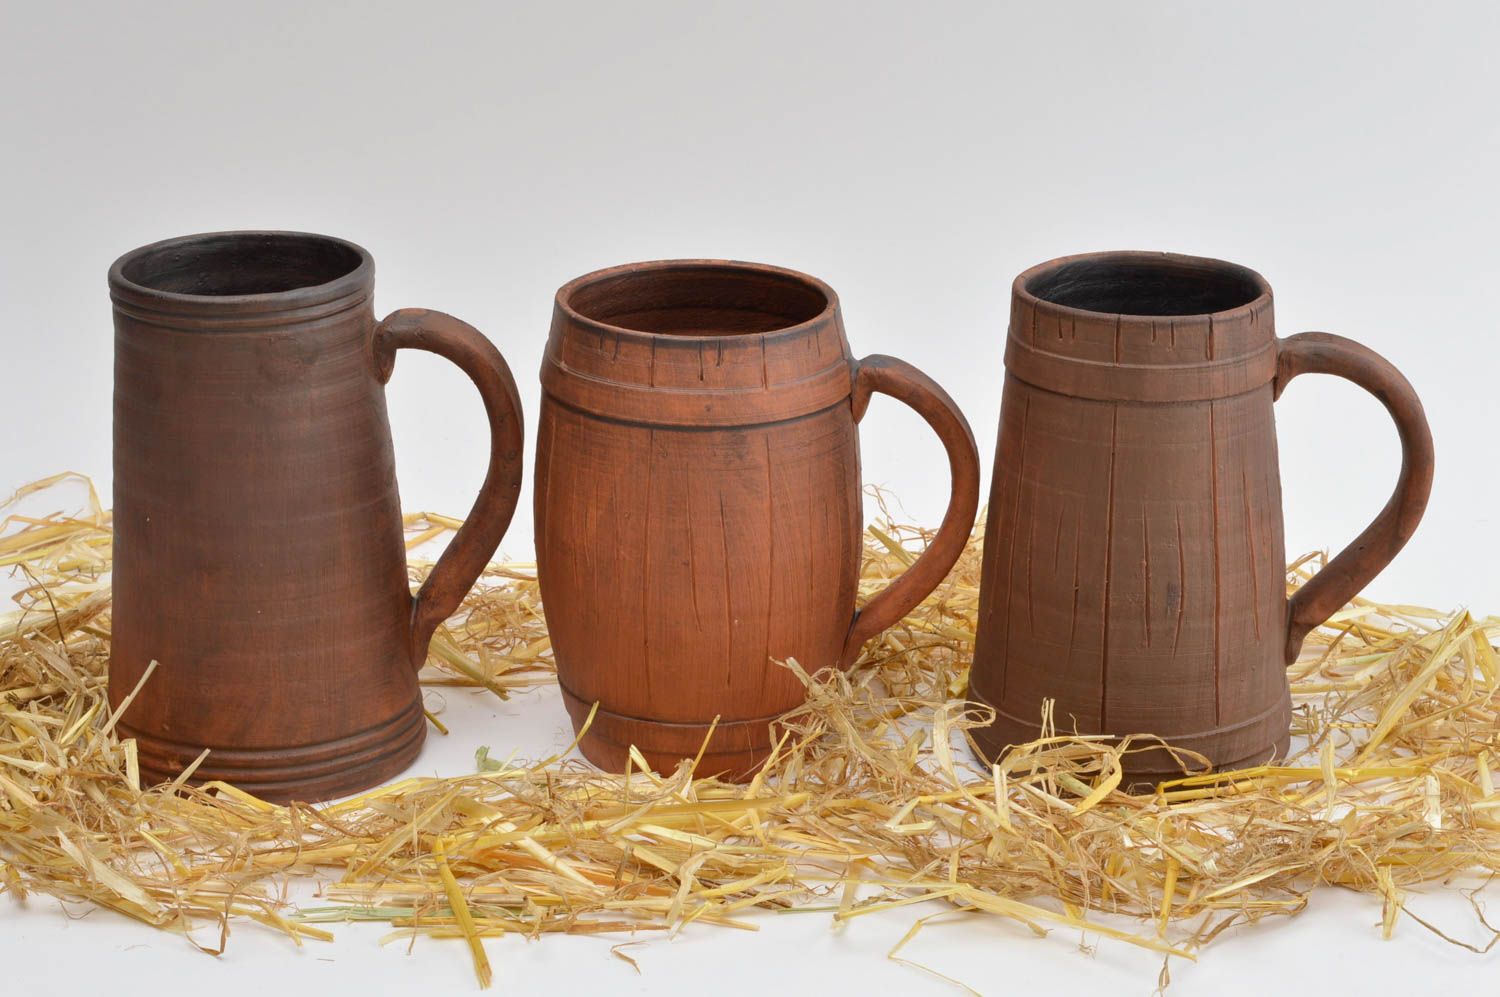 Set of 3 different clay beer mugs in German-style in dark brown color 4,46 lb photo 1